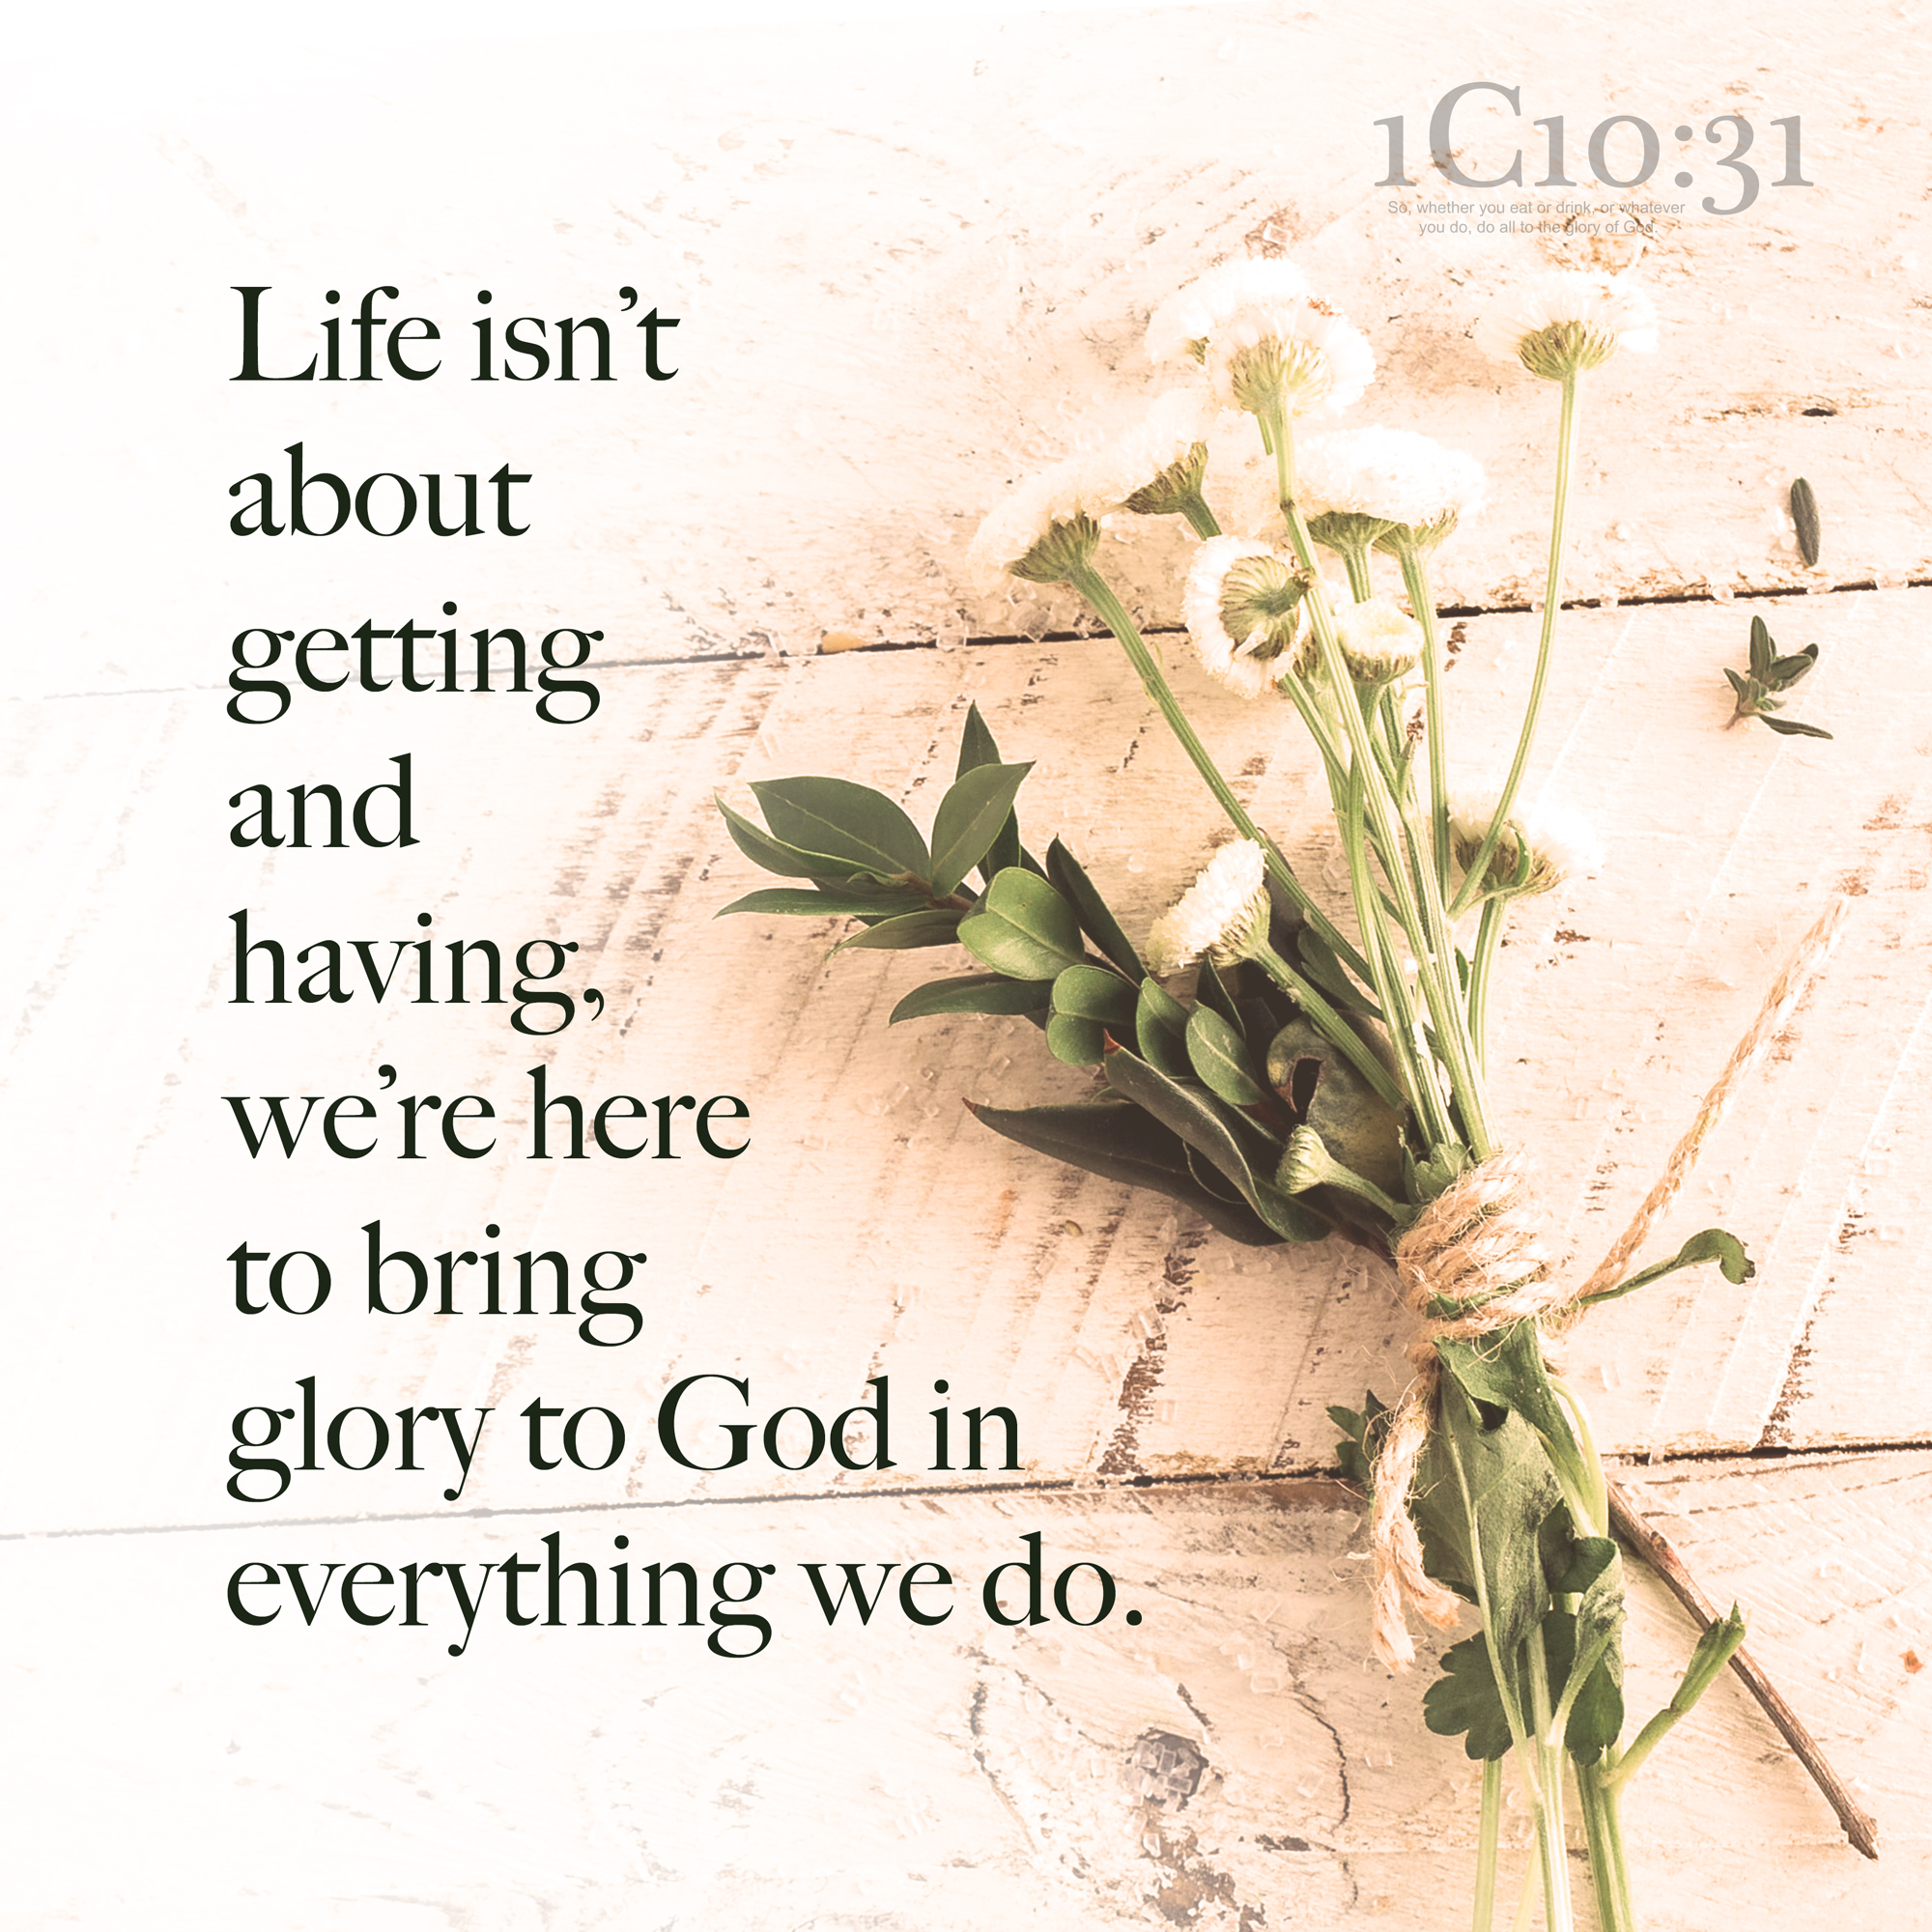 Life isn’t about getting and having, we’re hereto bring glory to God in everything we do.